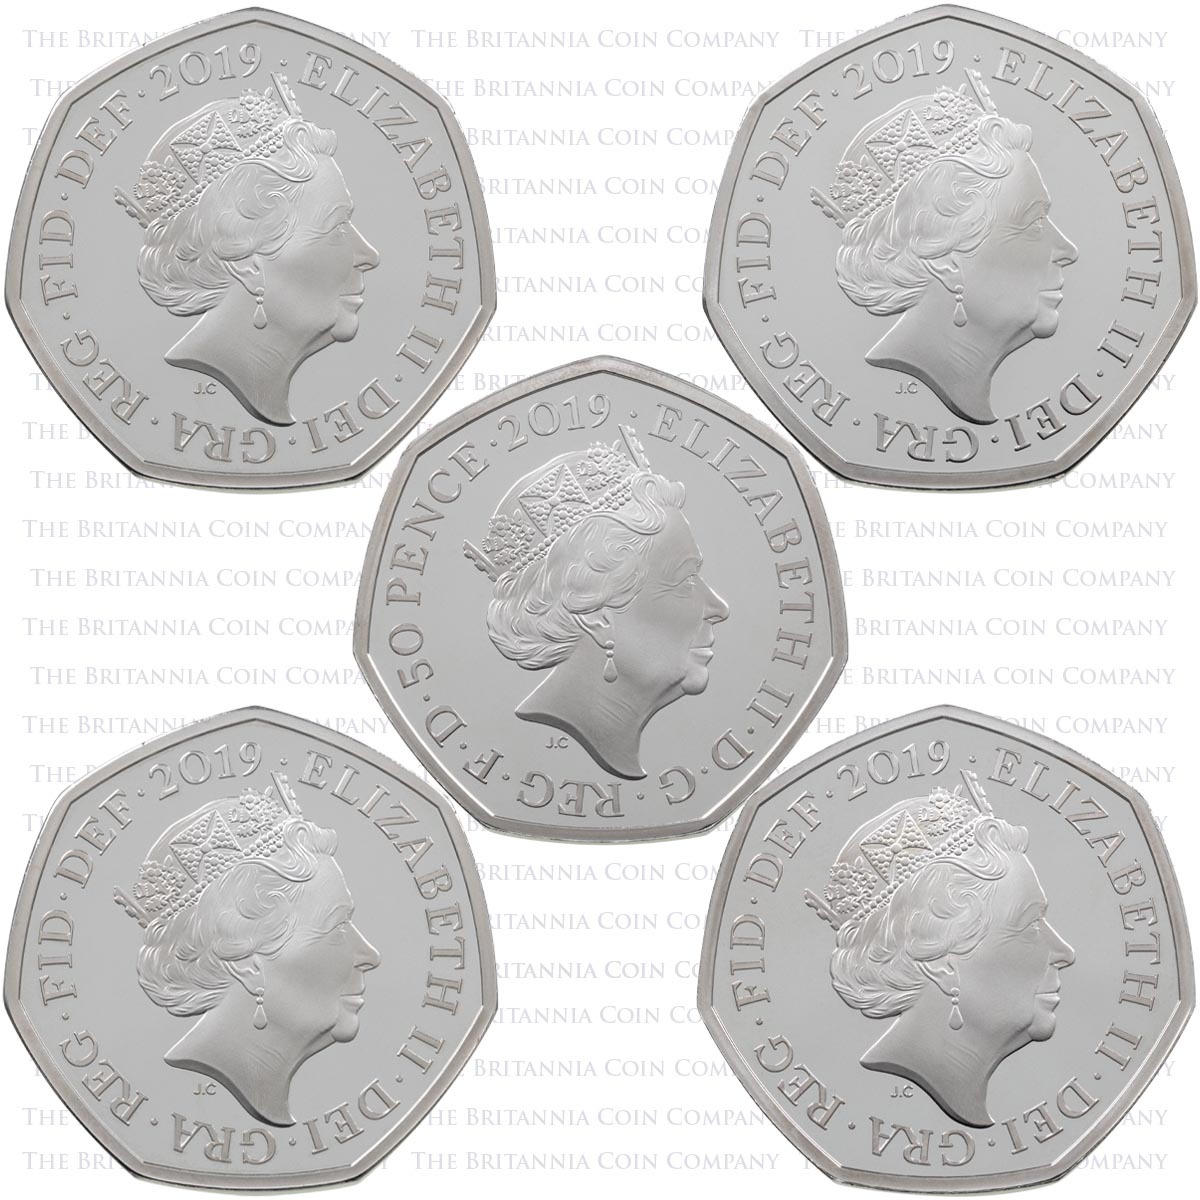 UK195CPF 2019 British Culture Fifty Years Of The Fifty Pence Piedfort Silver Proof Five Coin Set Obverses